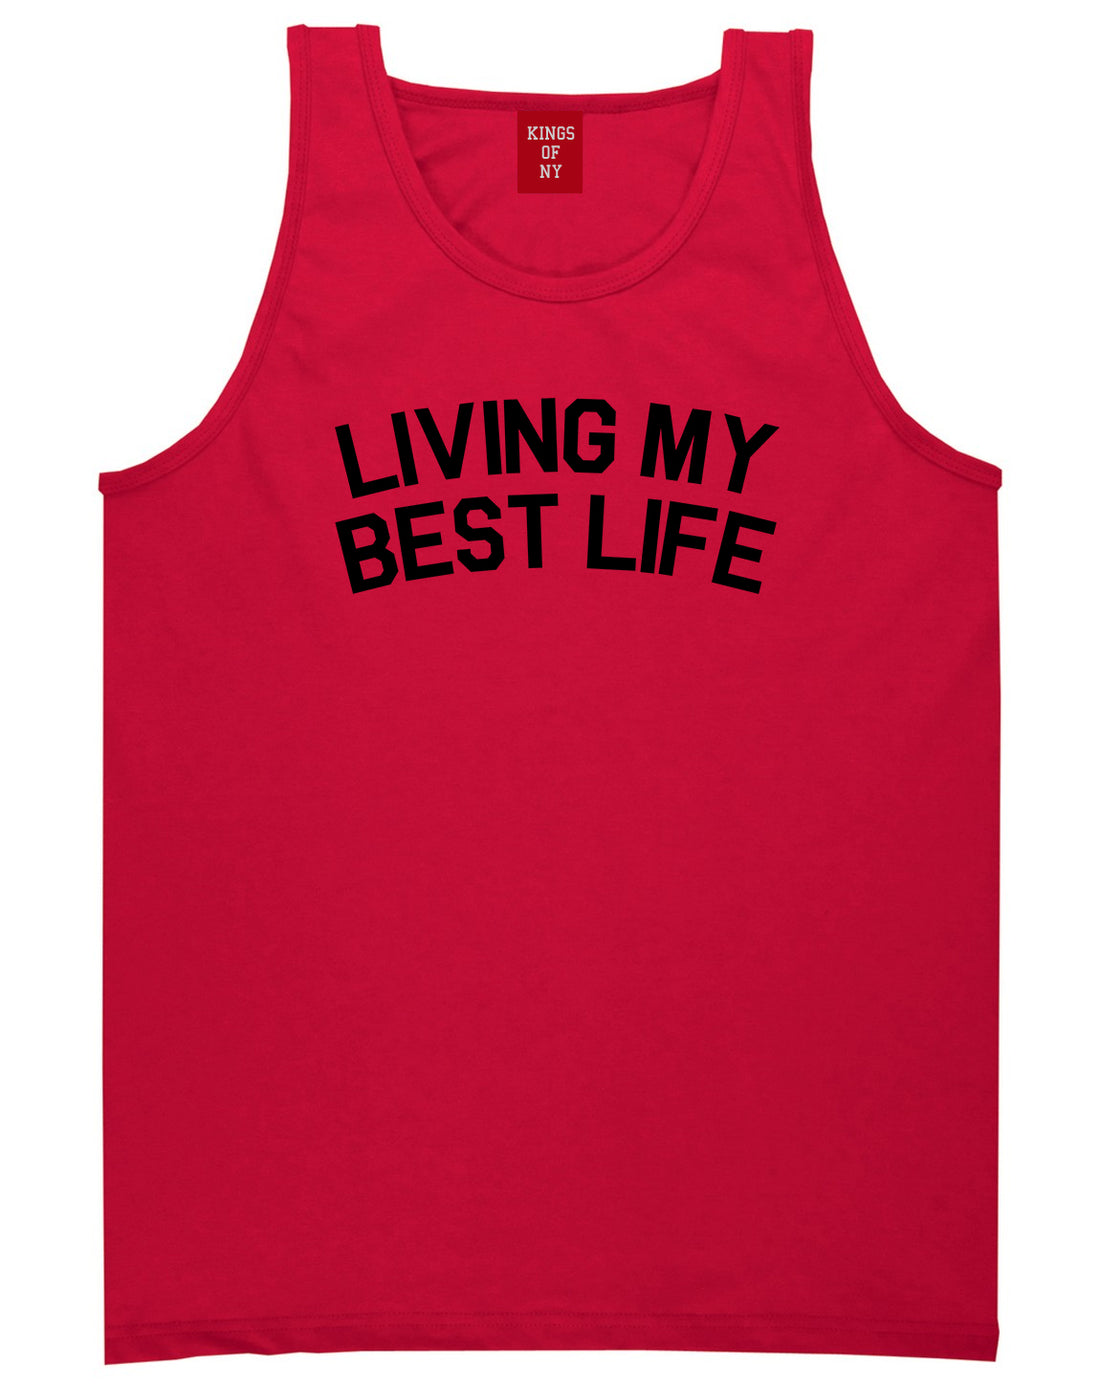 Living My Best Life Mens Tank Top Shirt Red by Kings Of NY